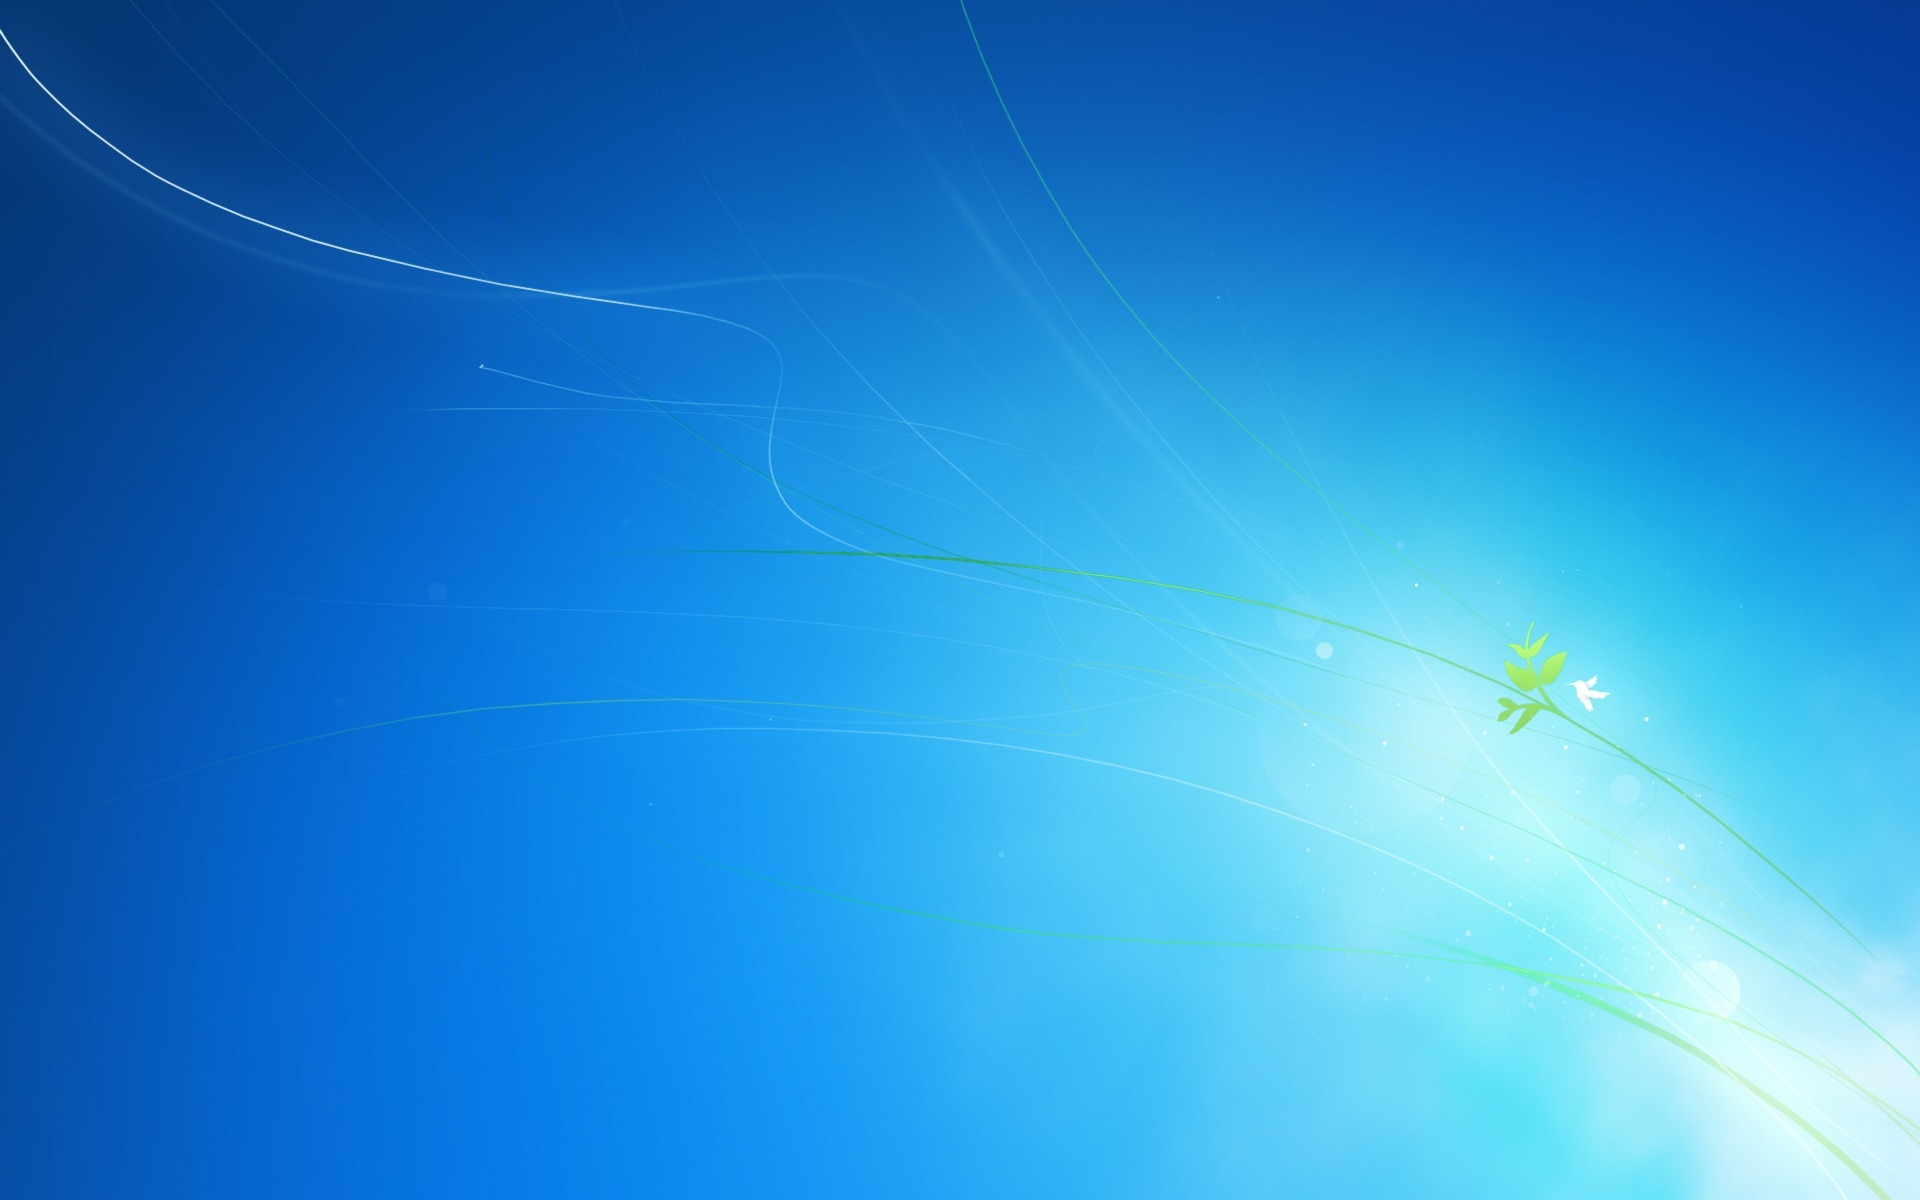 Windows 7 logon screen as your wallpaper theskywaspink 1920x1200